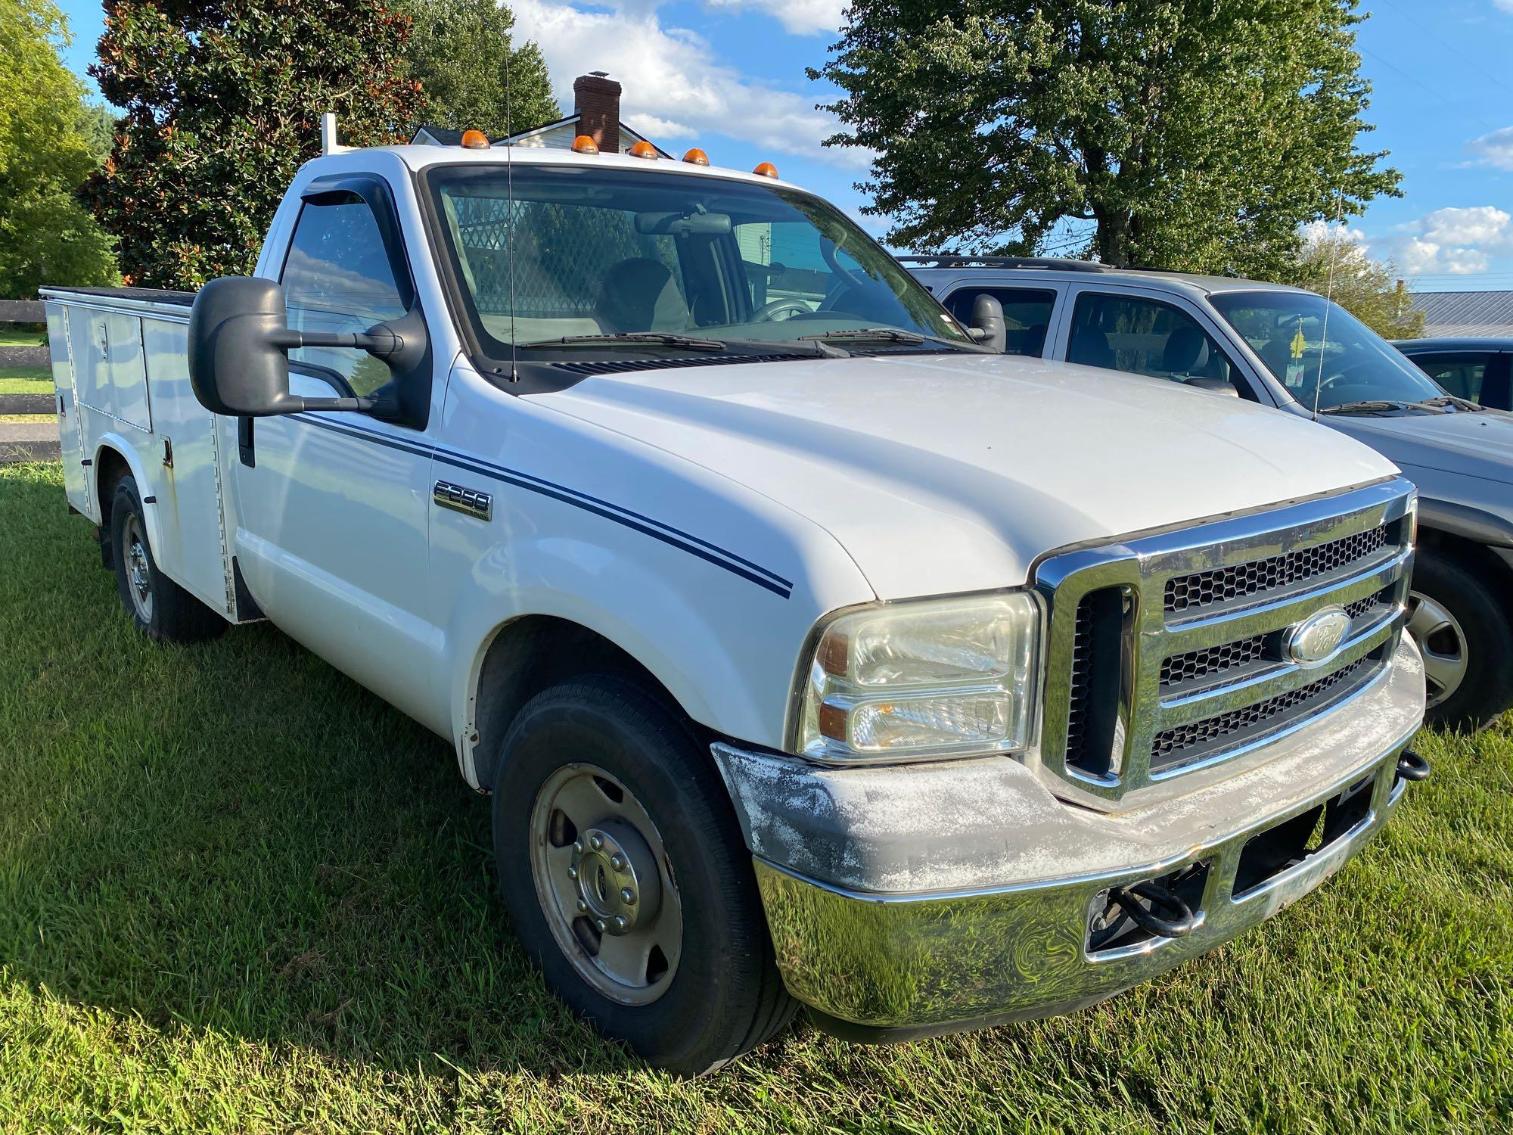 Image for 2006 Ford F-250 Pickup Truck w/ Work Body, VIN # 1FDNF20536EB14500 Mileage:  180,962